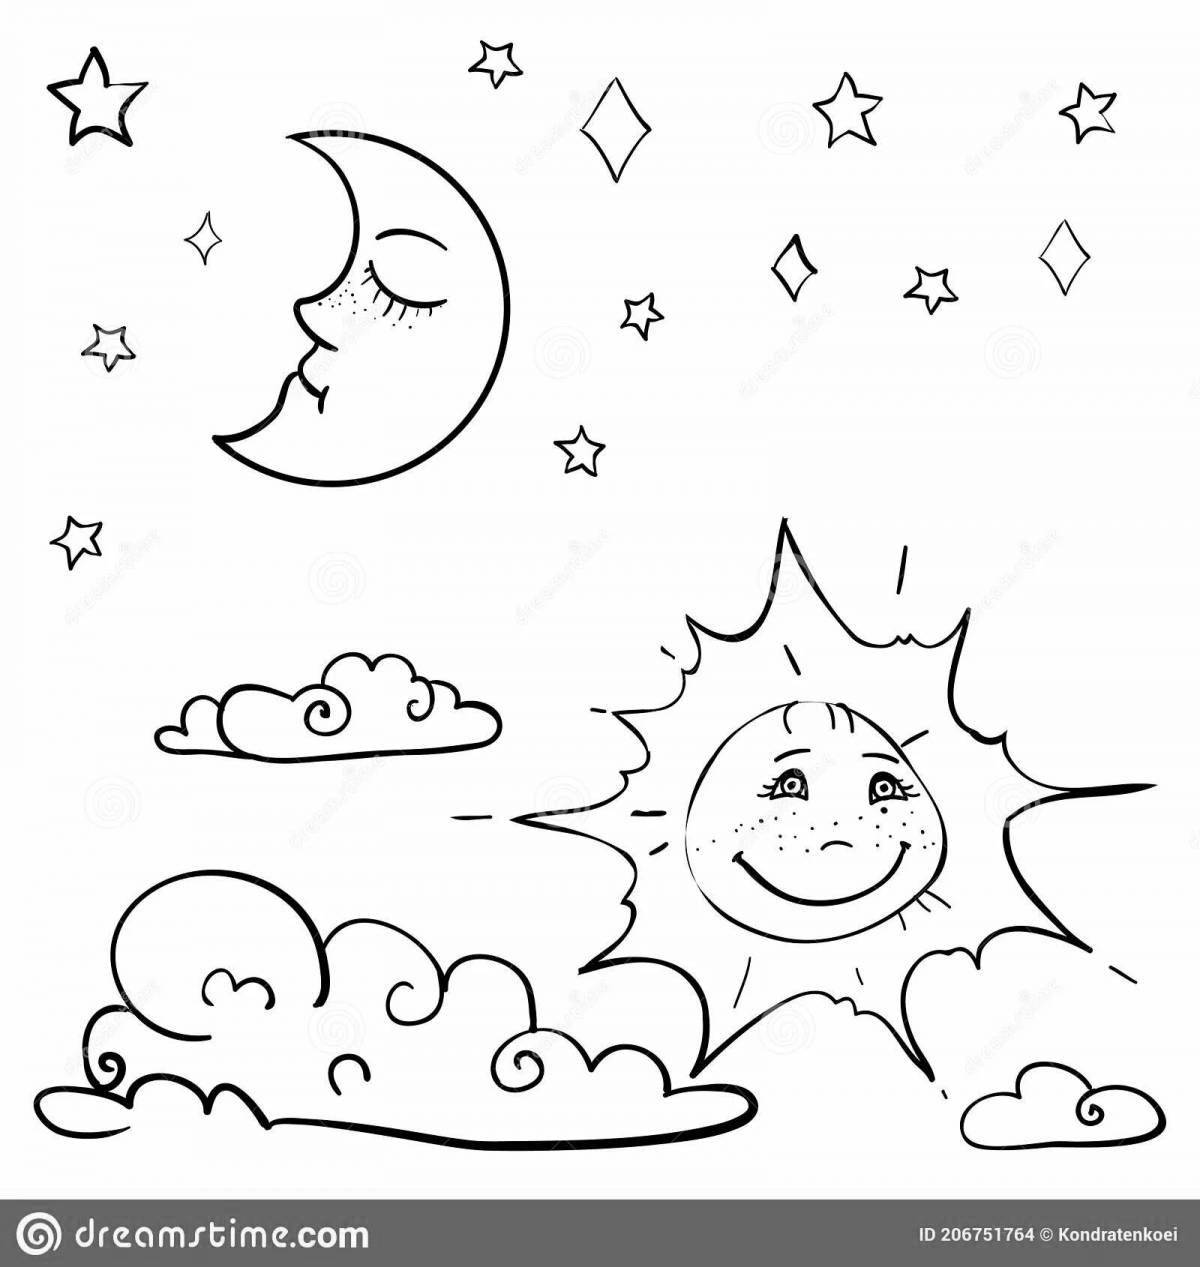 Awesome night for kids coloring book